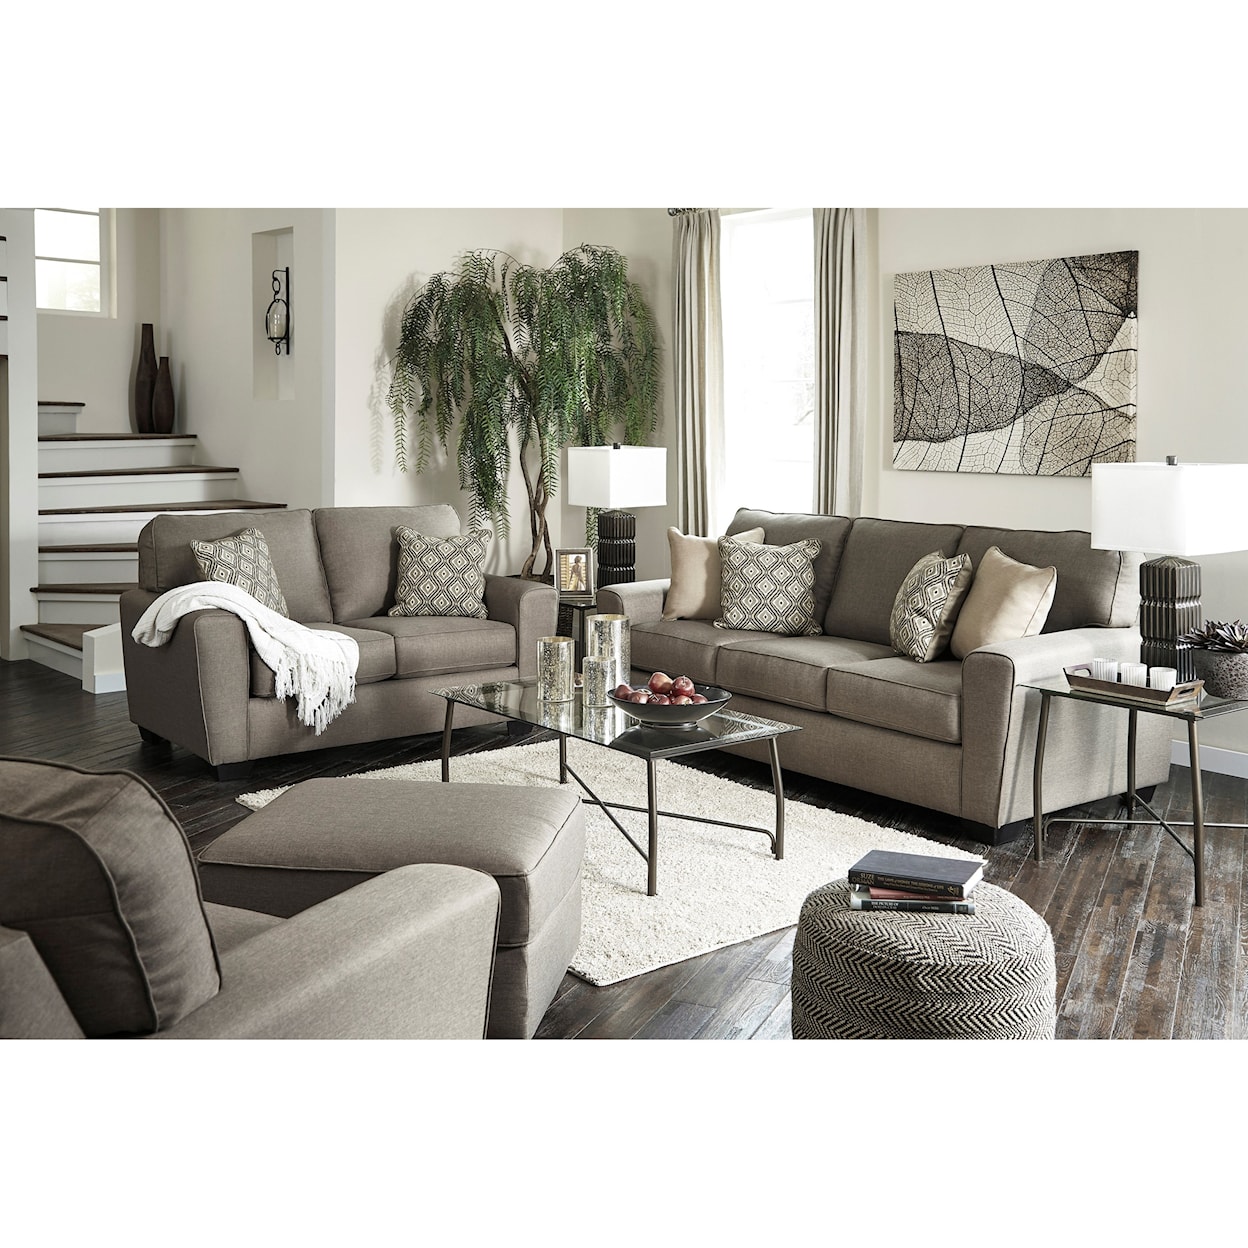 Benchcraft Calicho 4pc living room group